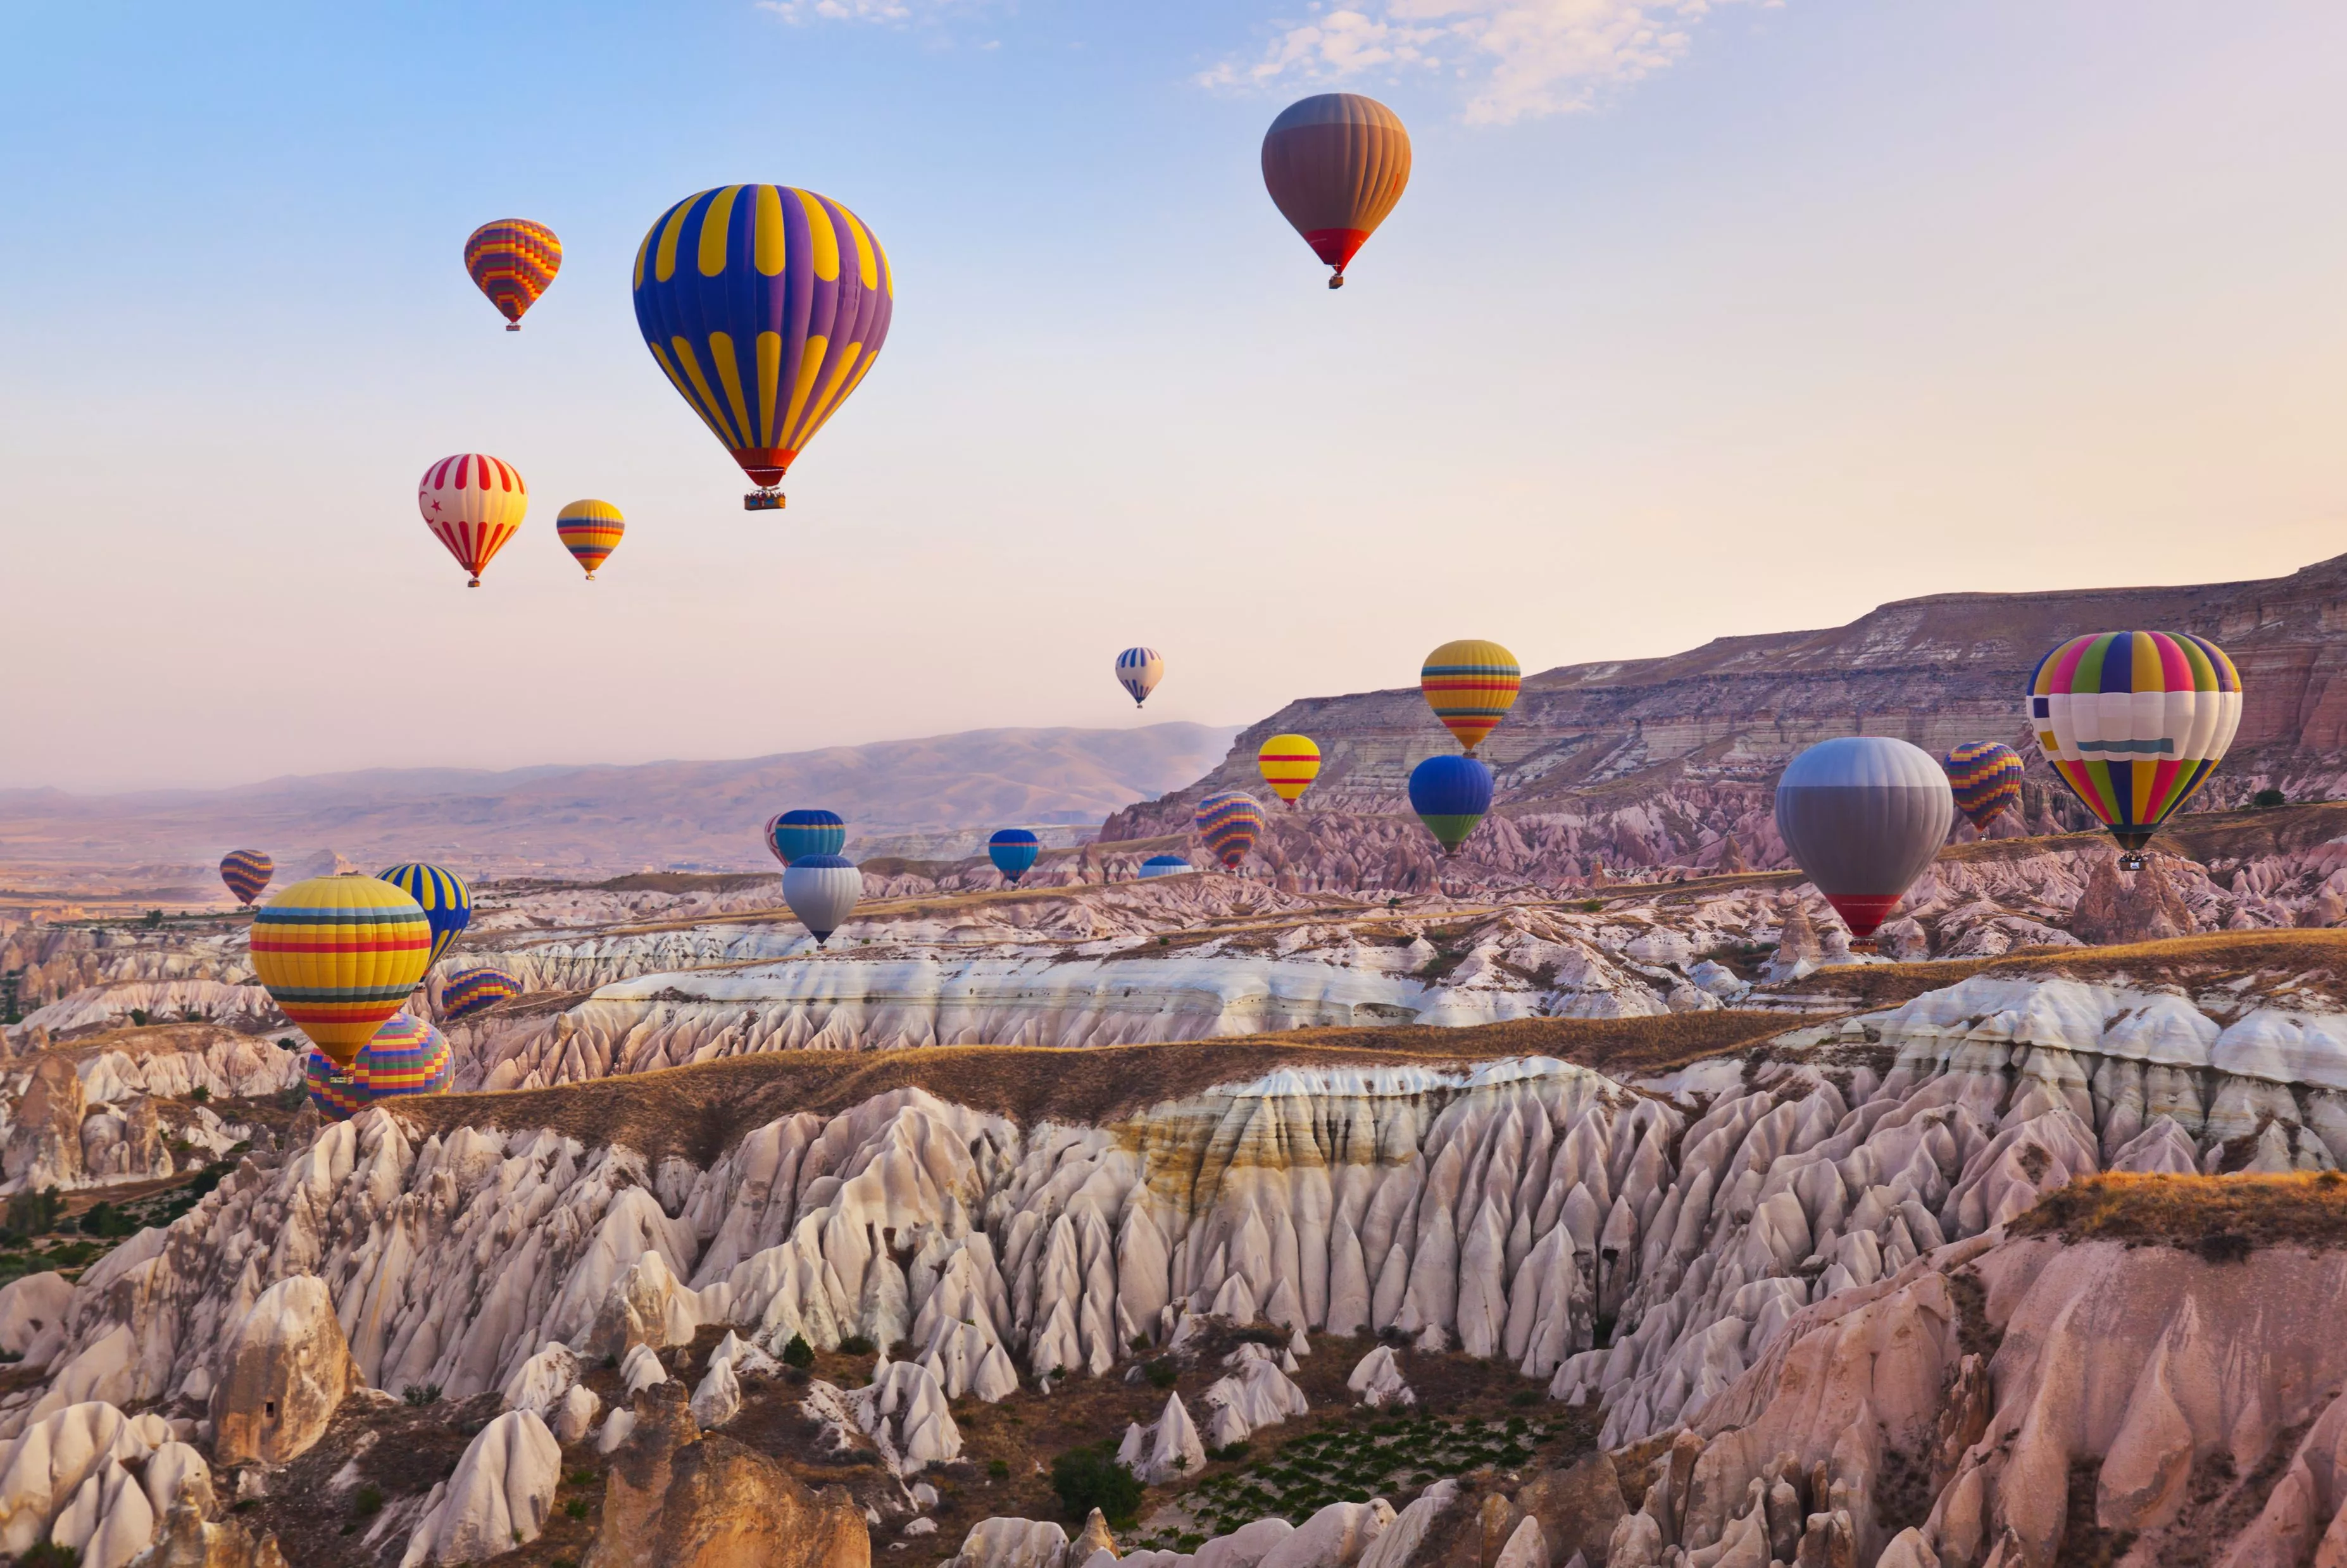 Turkey Hot Air Balloons in Turkey, Central Asia | Hot Air Ballooning - Rated 1.3